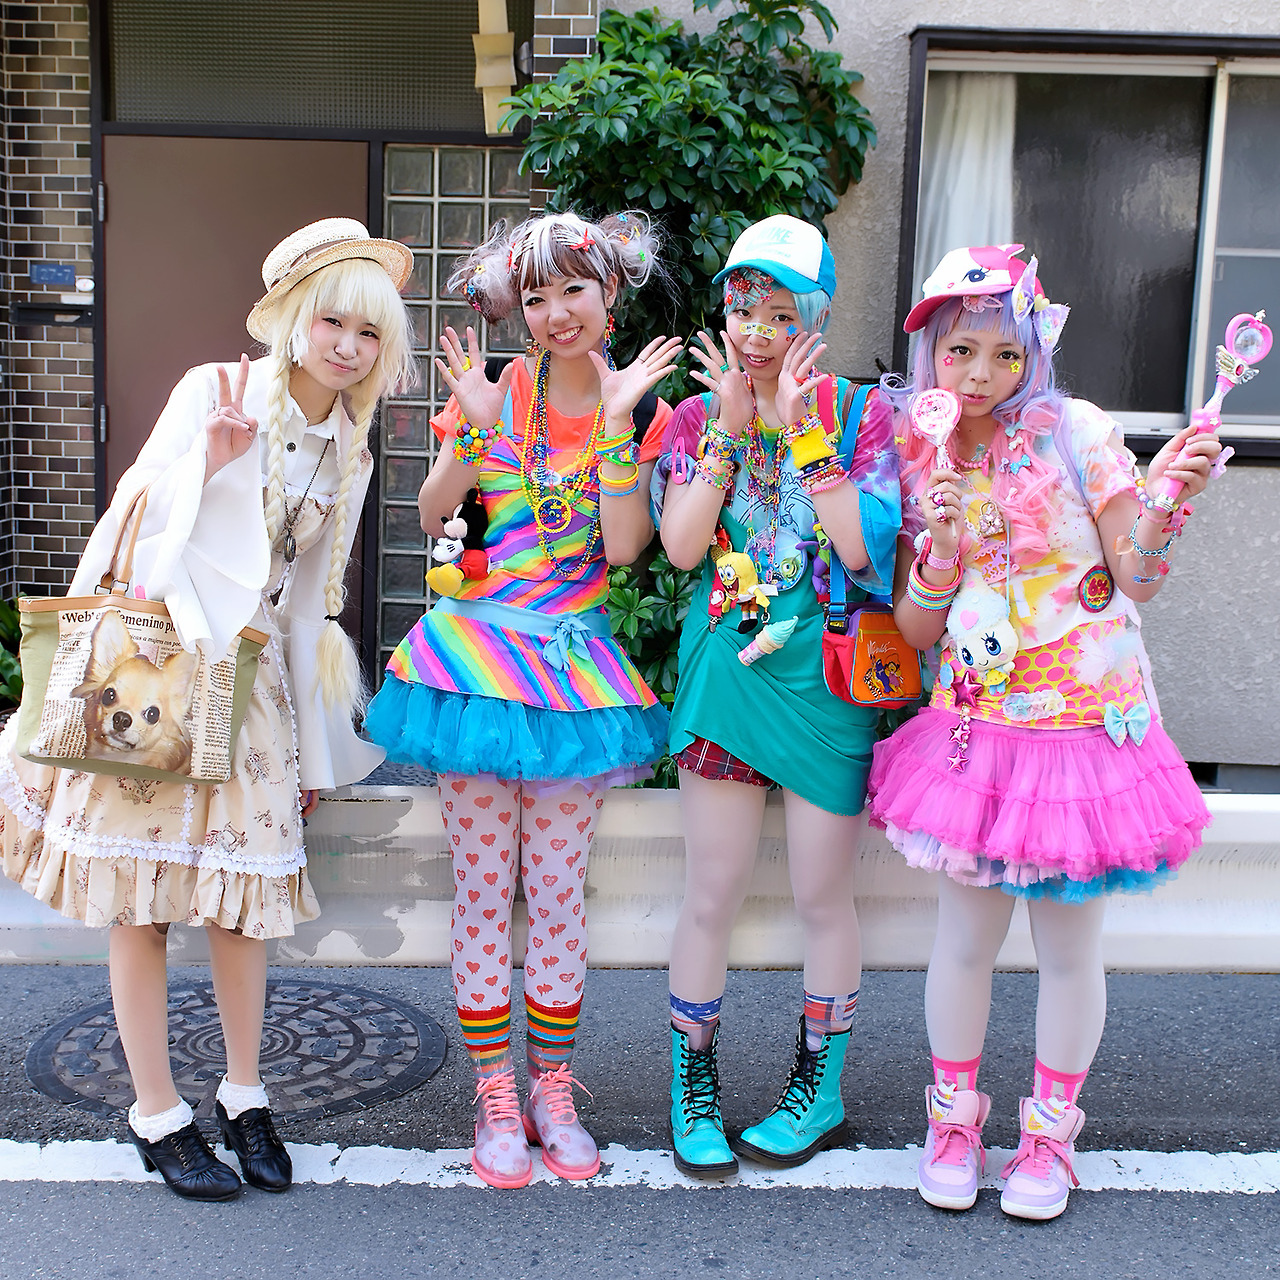 What Is Harajuku Style?